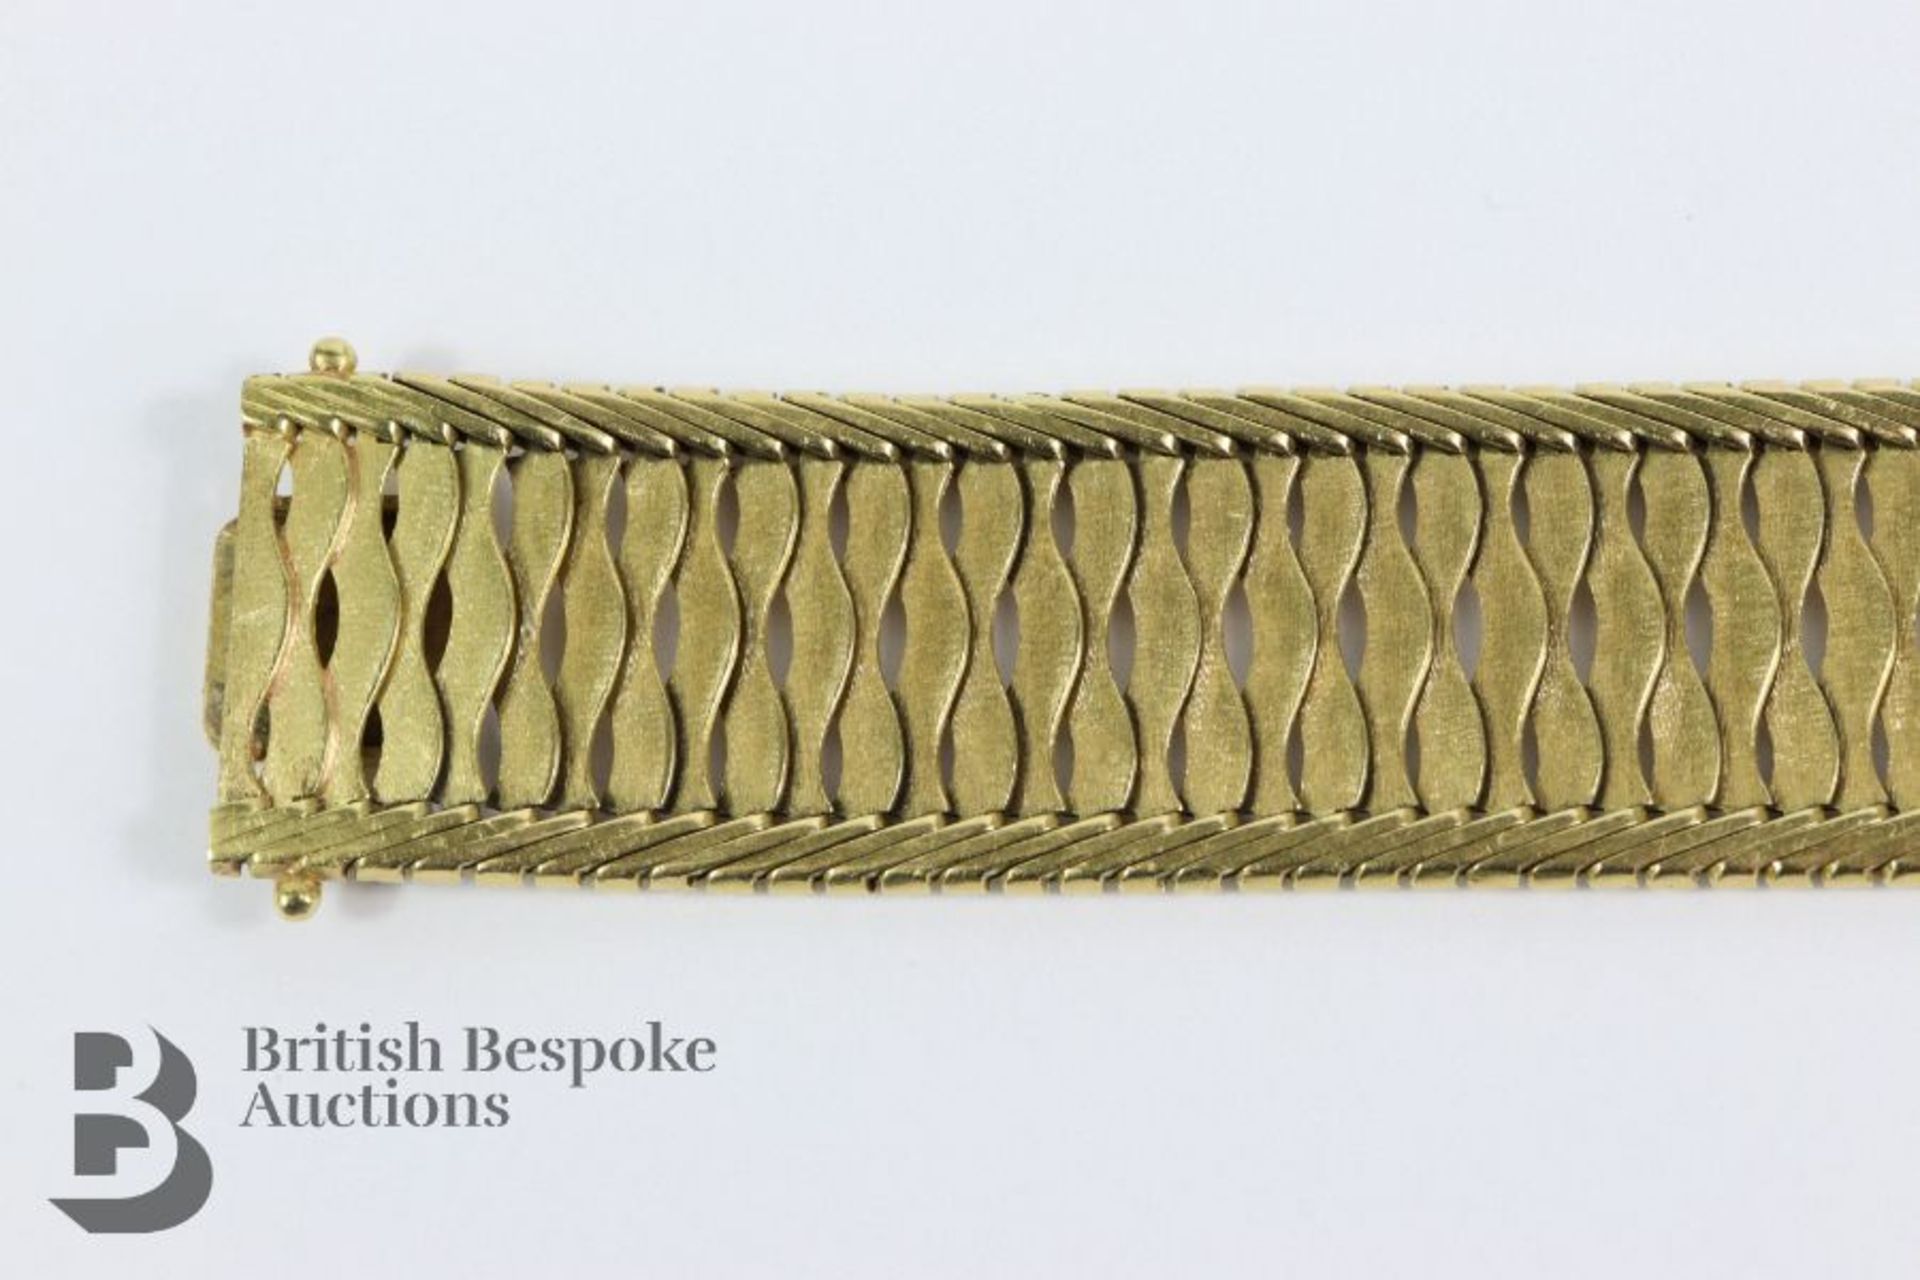 18ct Yellow Gold Articulated Mesh Link Bracelet - Image 3 of 5